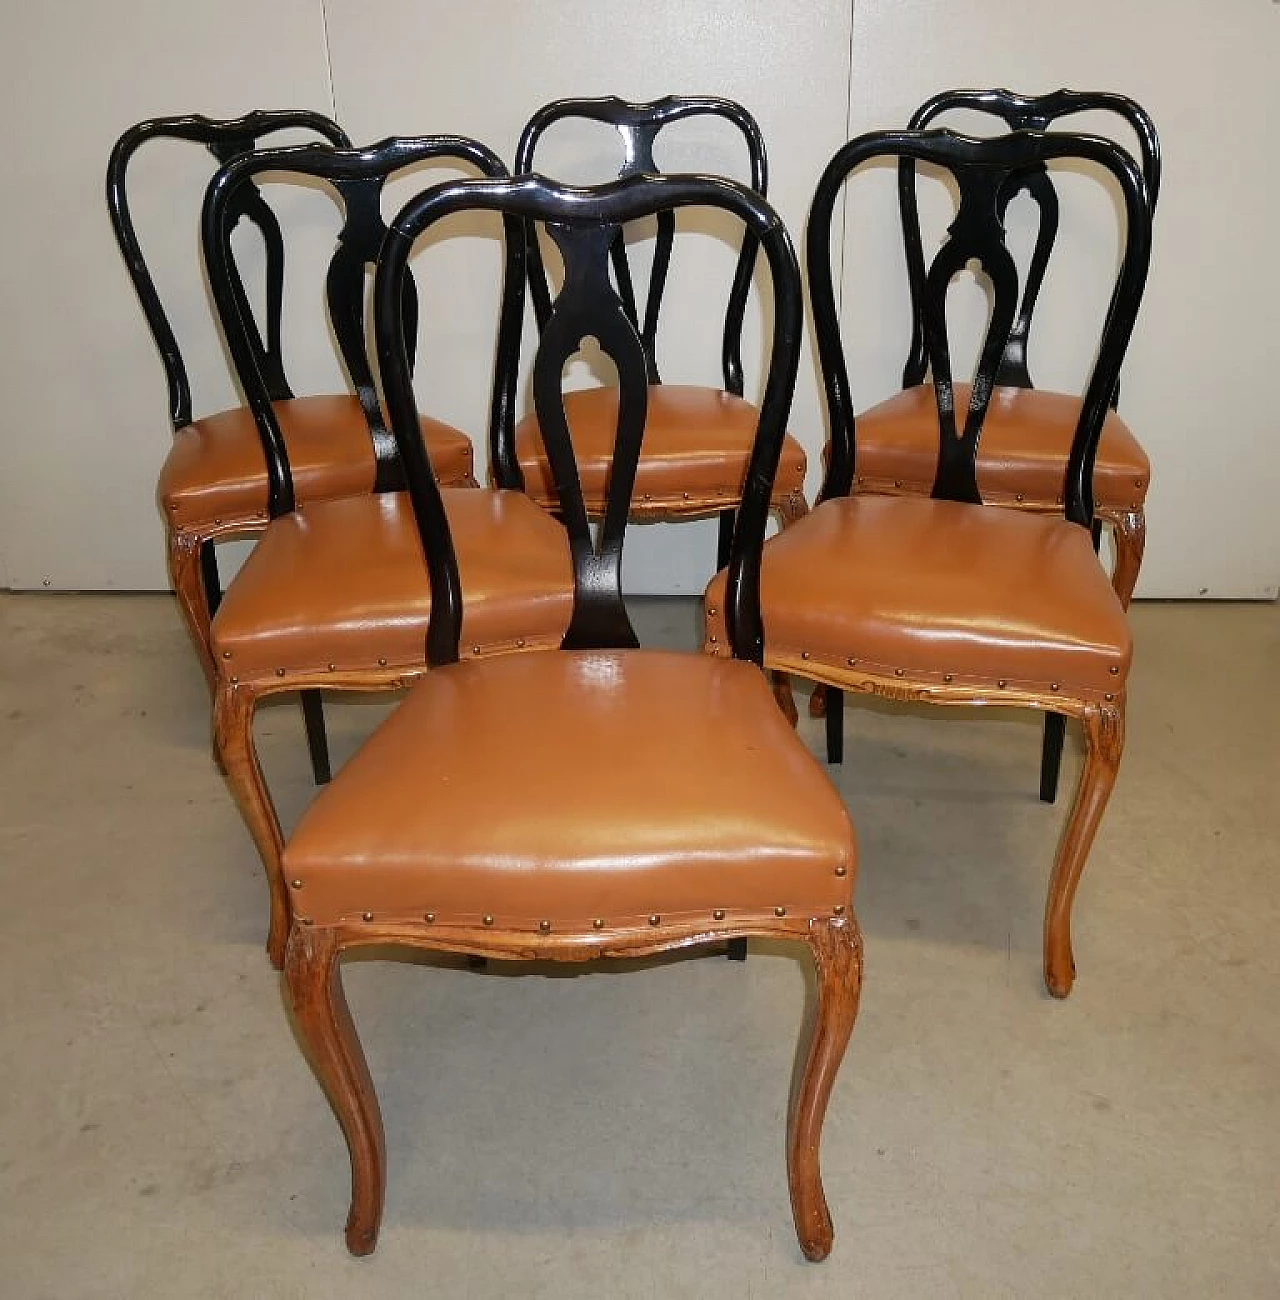 6 Chippendale style wooden chairs, 1950s 14